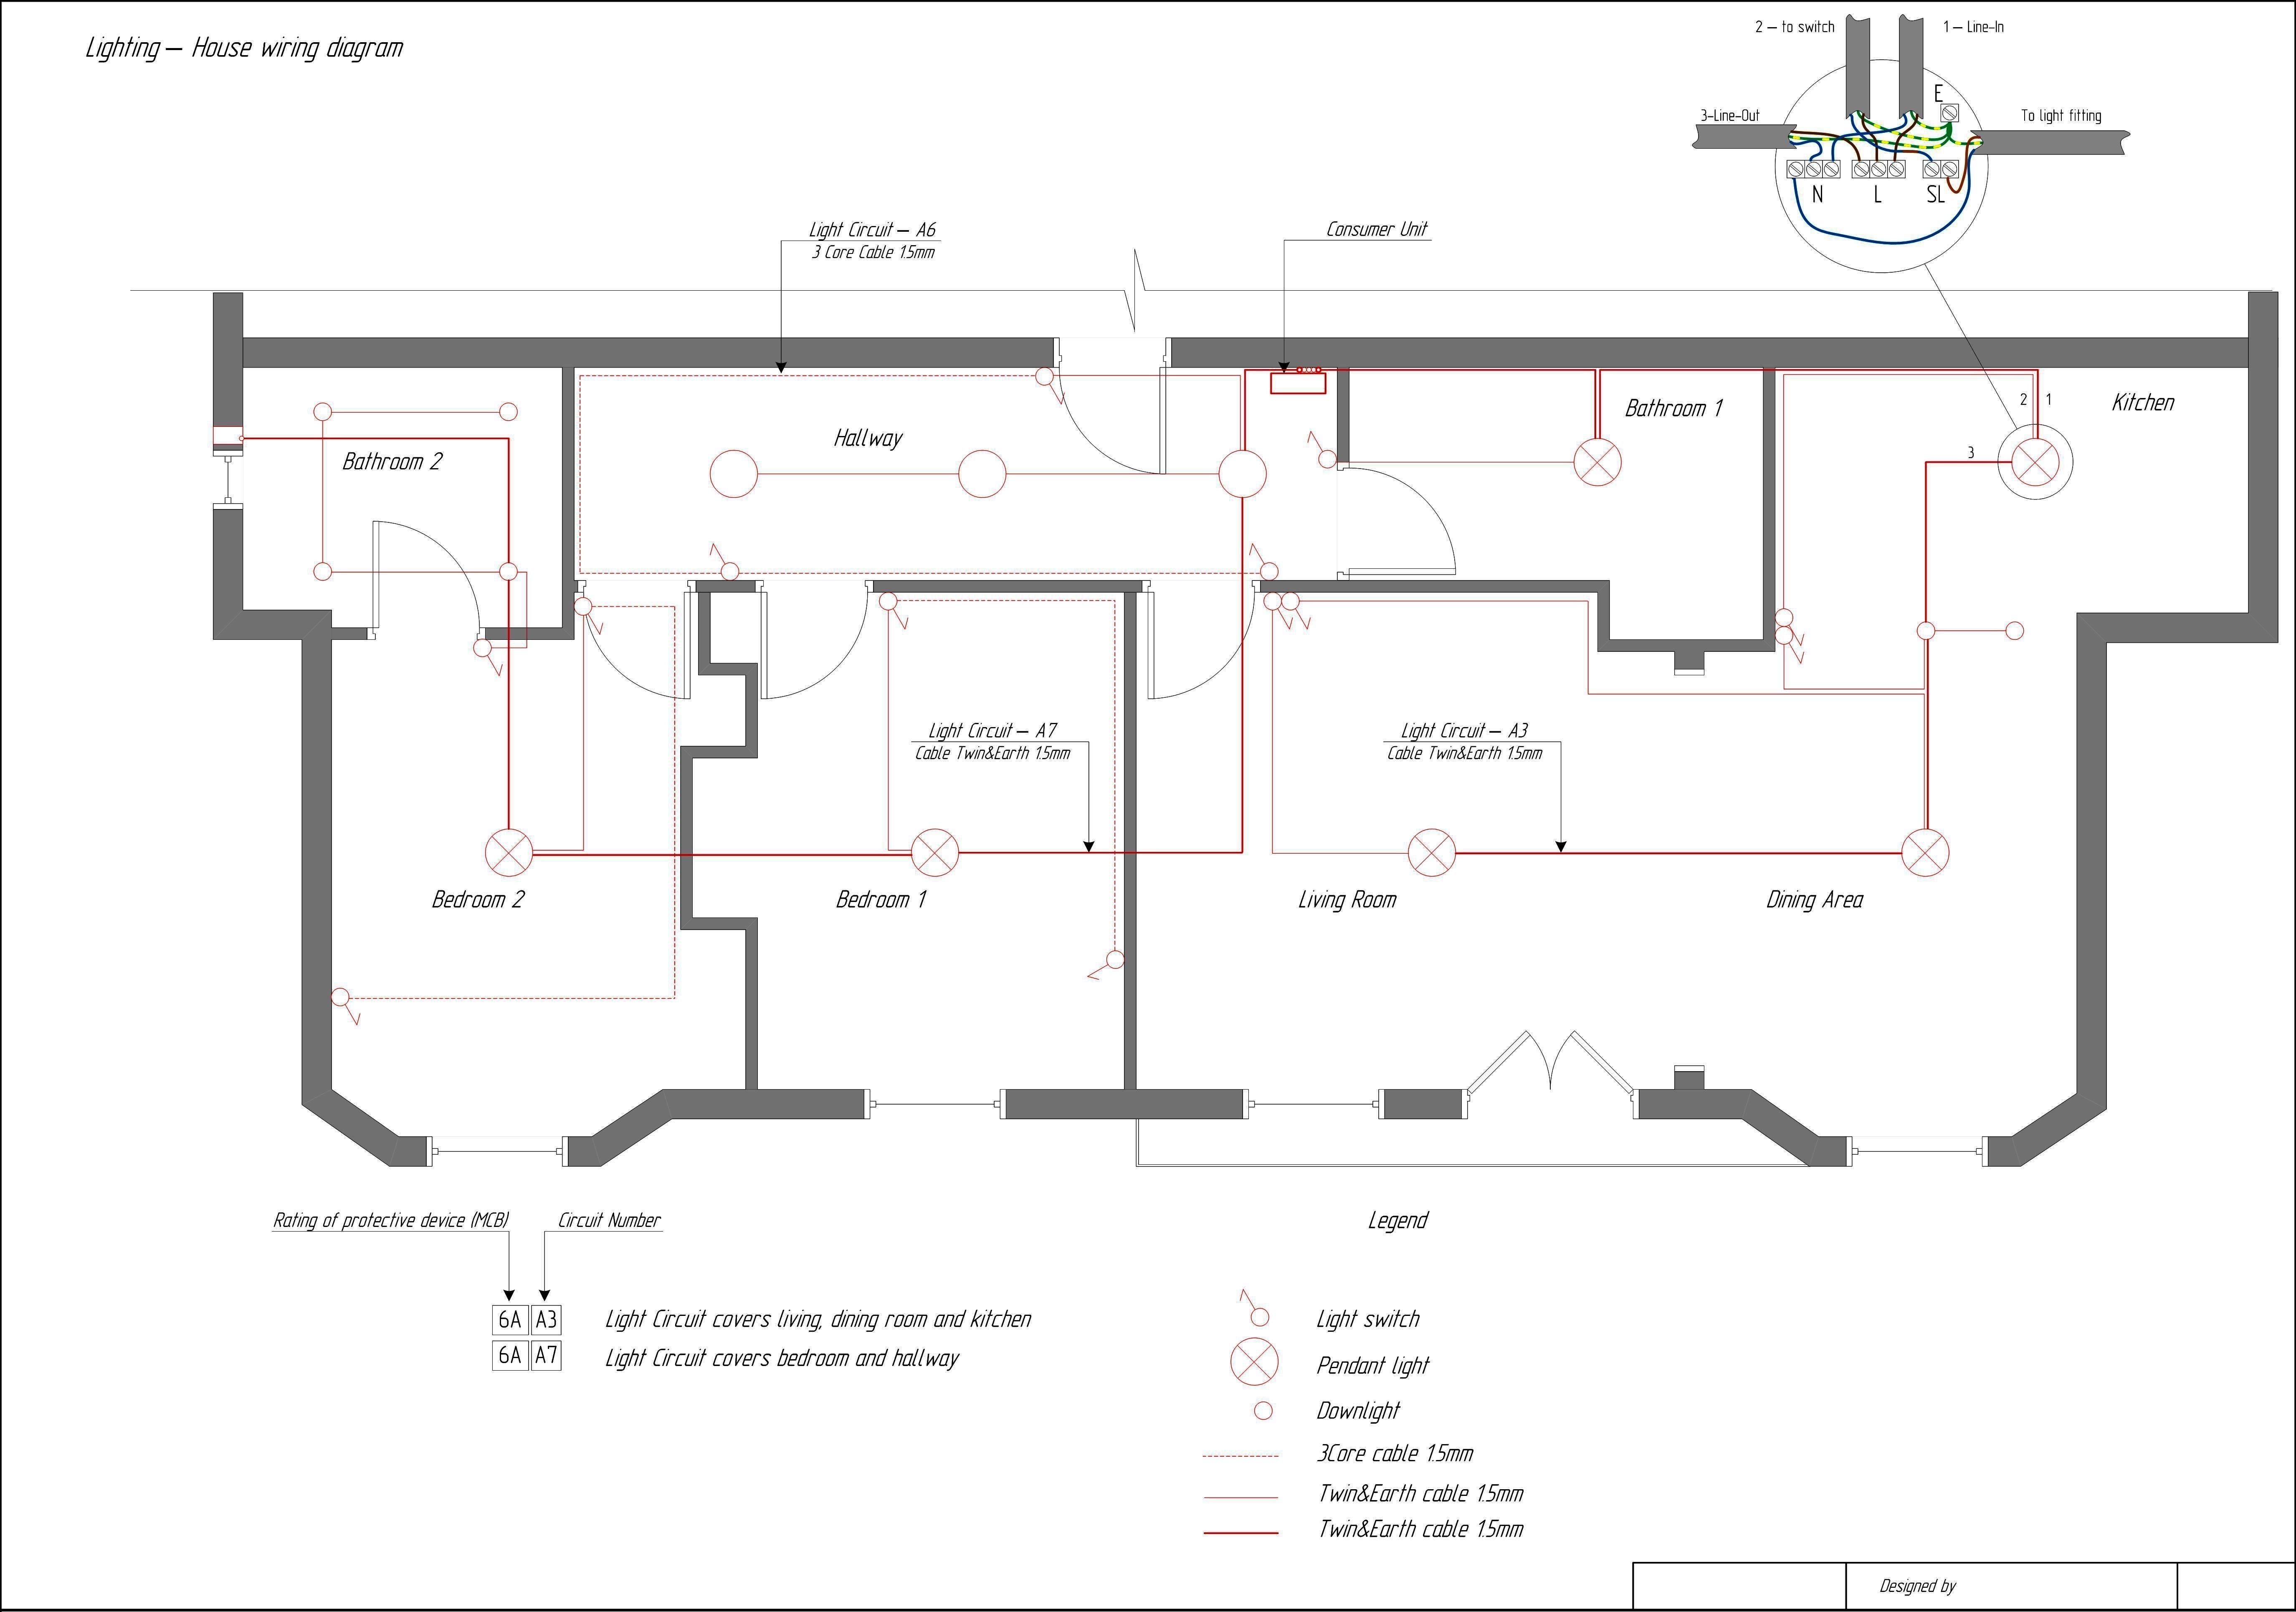 Schematic Diagram House Electrical Wiring Book House Wiring Diagram Electrical Floor Plan 2004 2010 Bmw